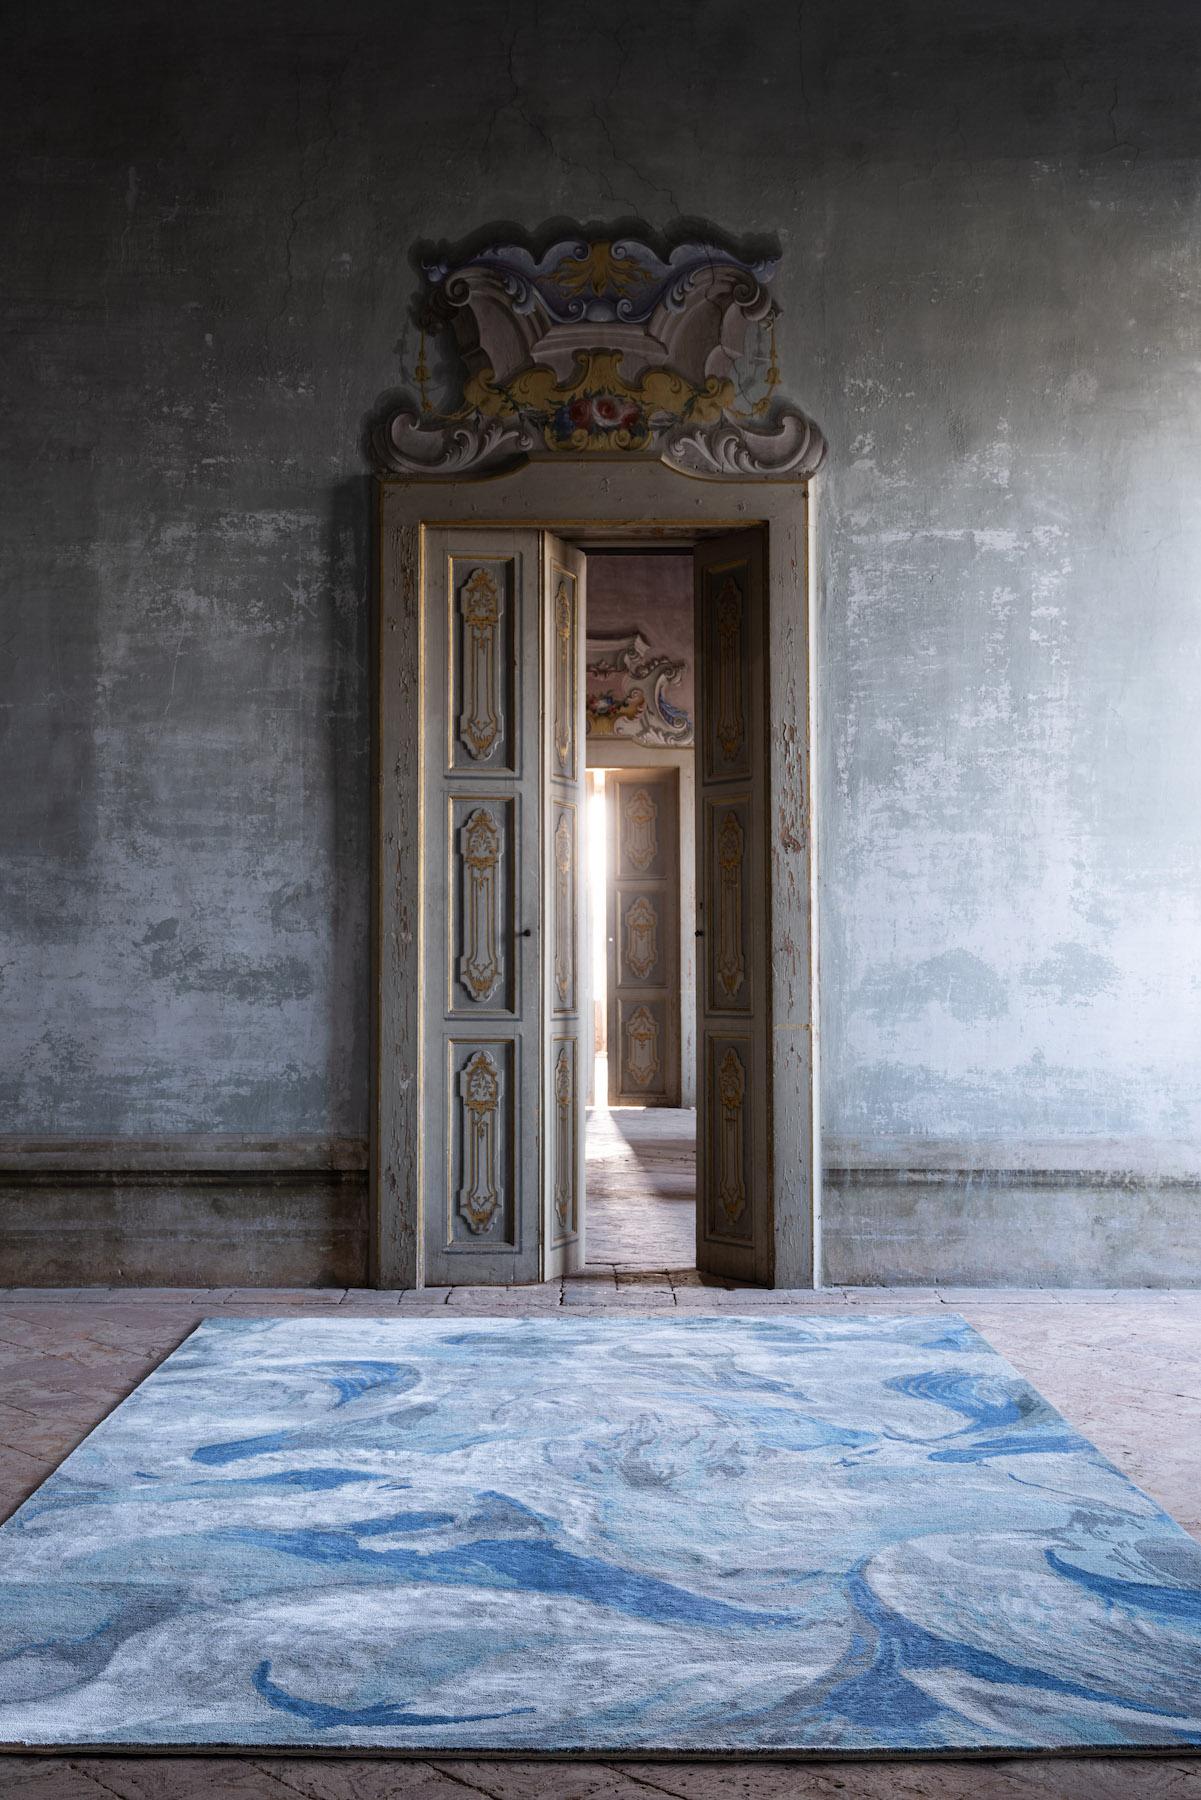 Inspired by the beautiful Nepalese skyscape where our rugs are made, Castro Smith evokes his iconic and whimsical engraving skills to create an ever-evolving design. Handcrafted in a fusion of wool and silk, the lustrous accents encourage the viewer